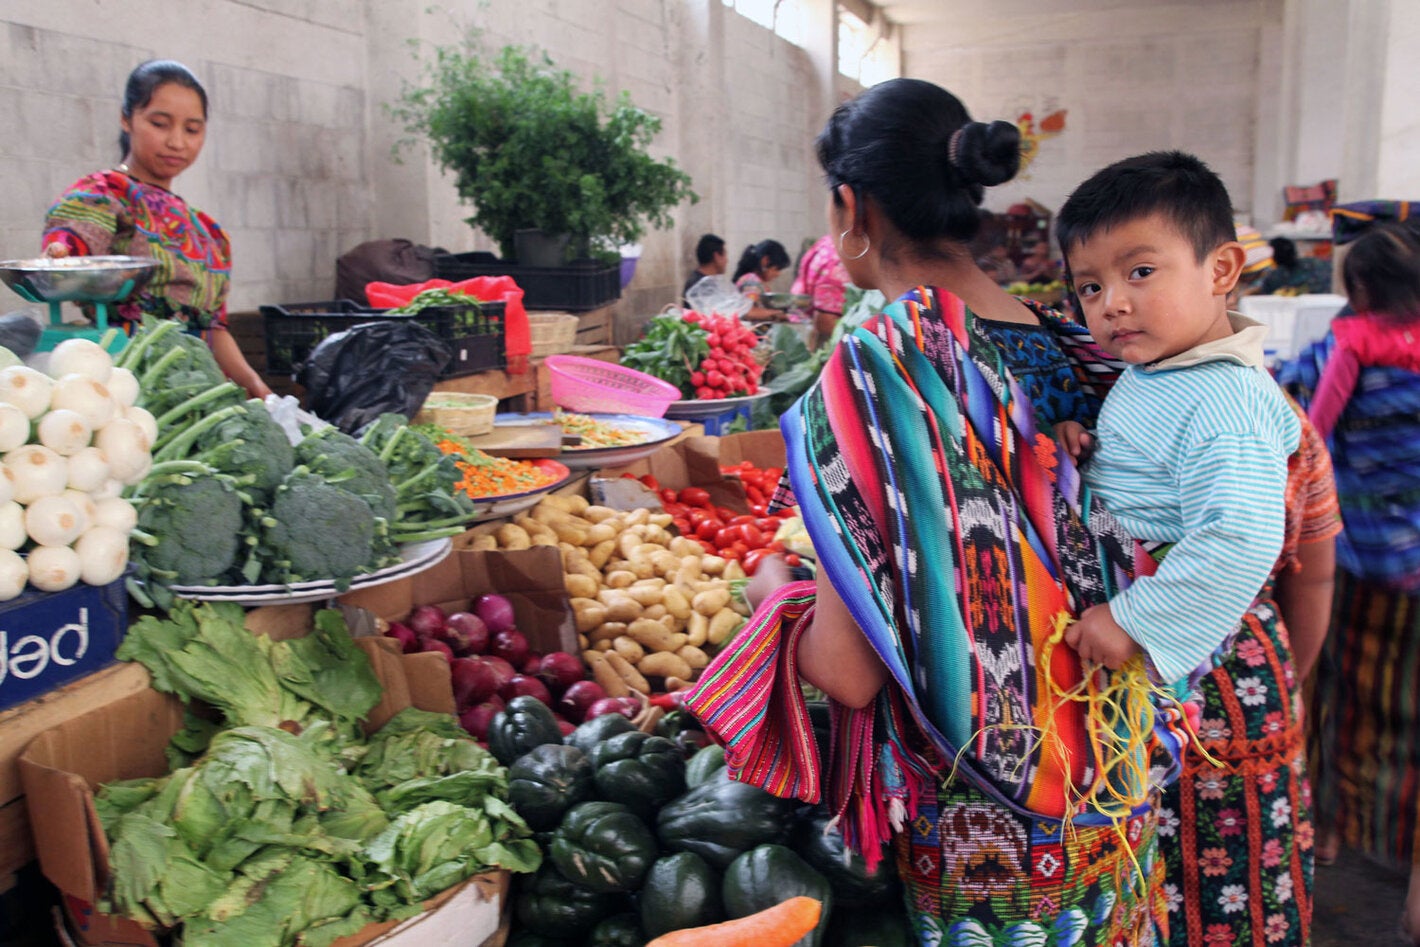 Indigenous moher and child in market